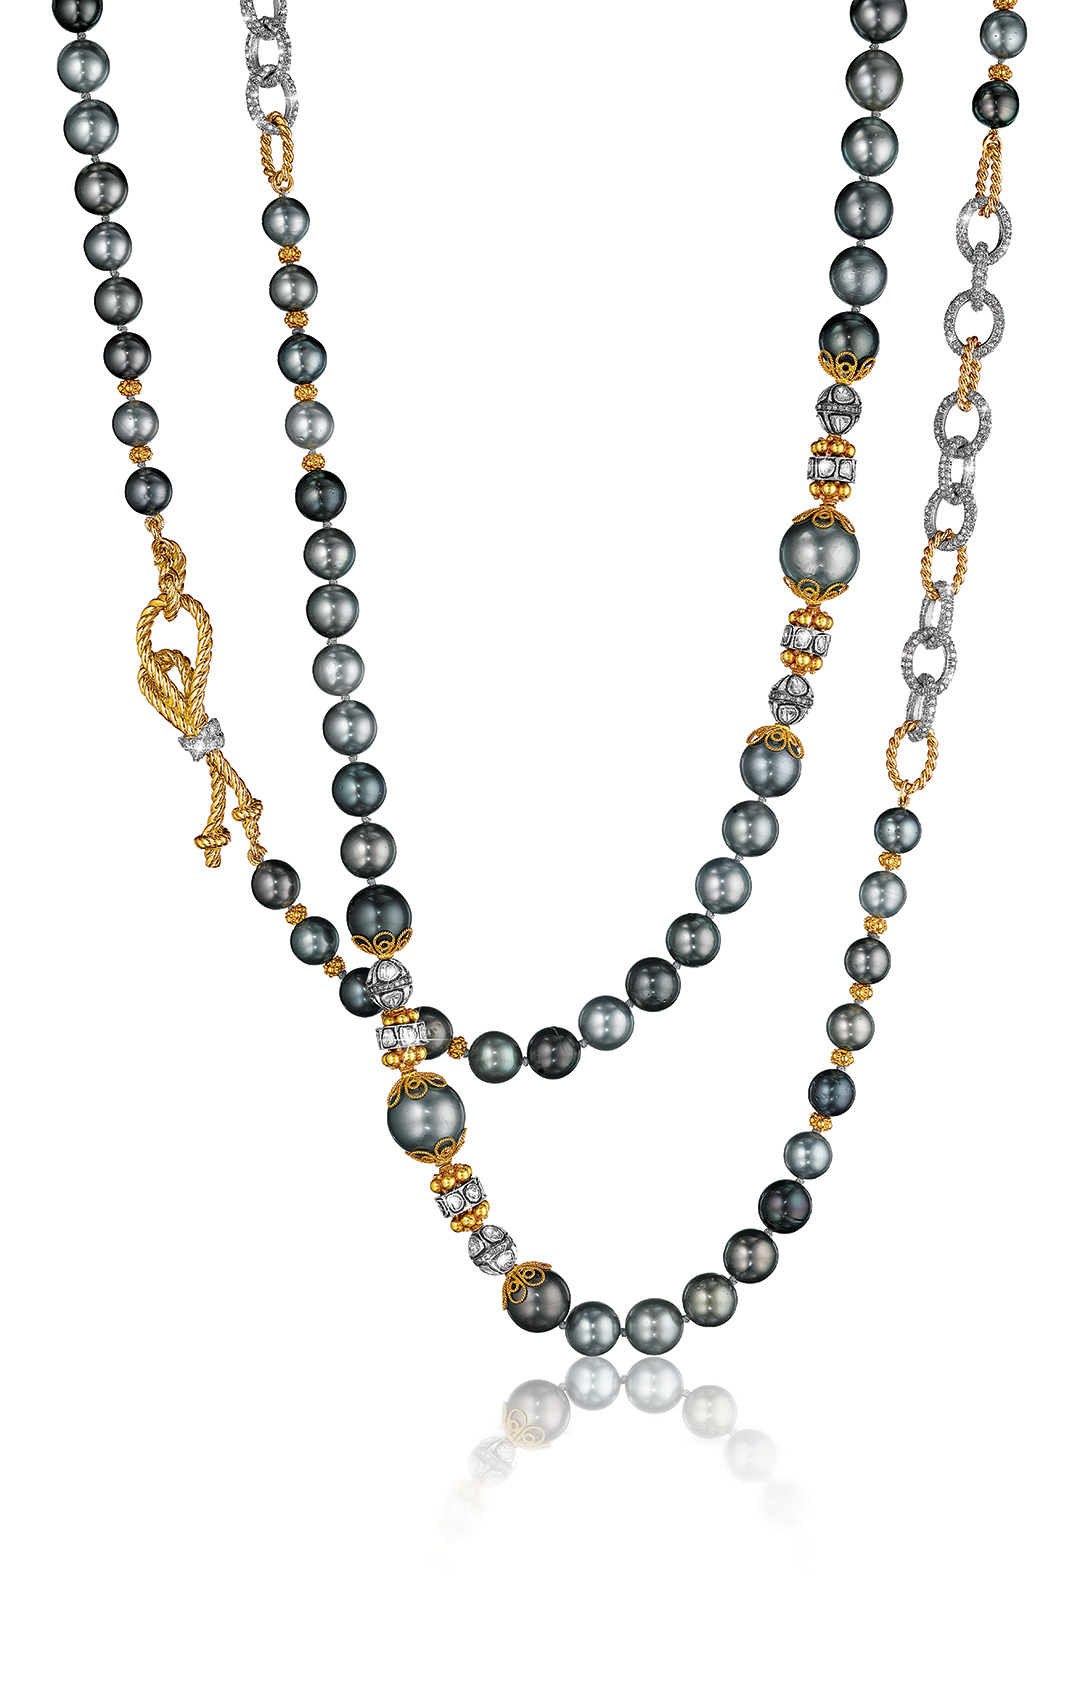 Verdura-Byzantine-Pearl-Necklace-Black-Pearl-Rope-Knot-Clasp-2017-hr